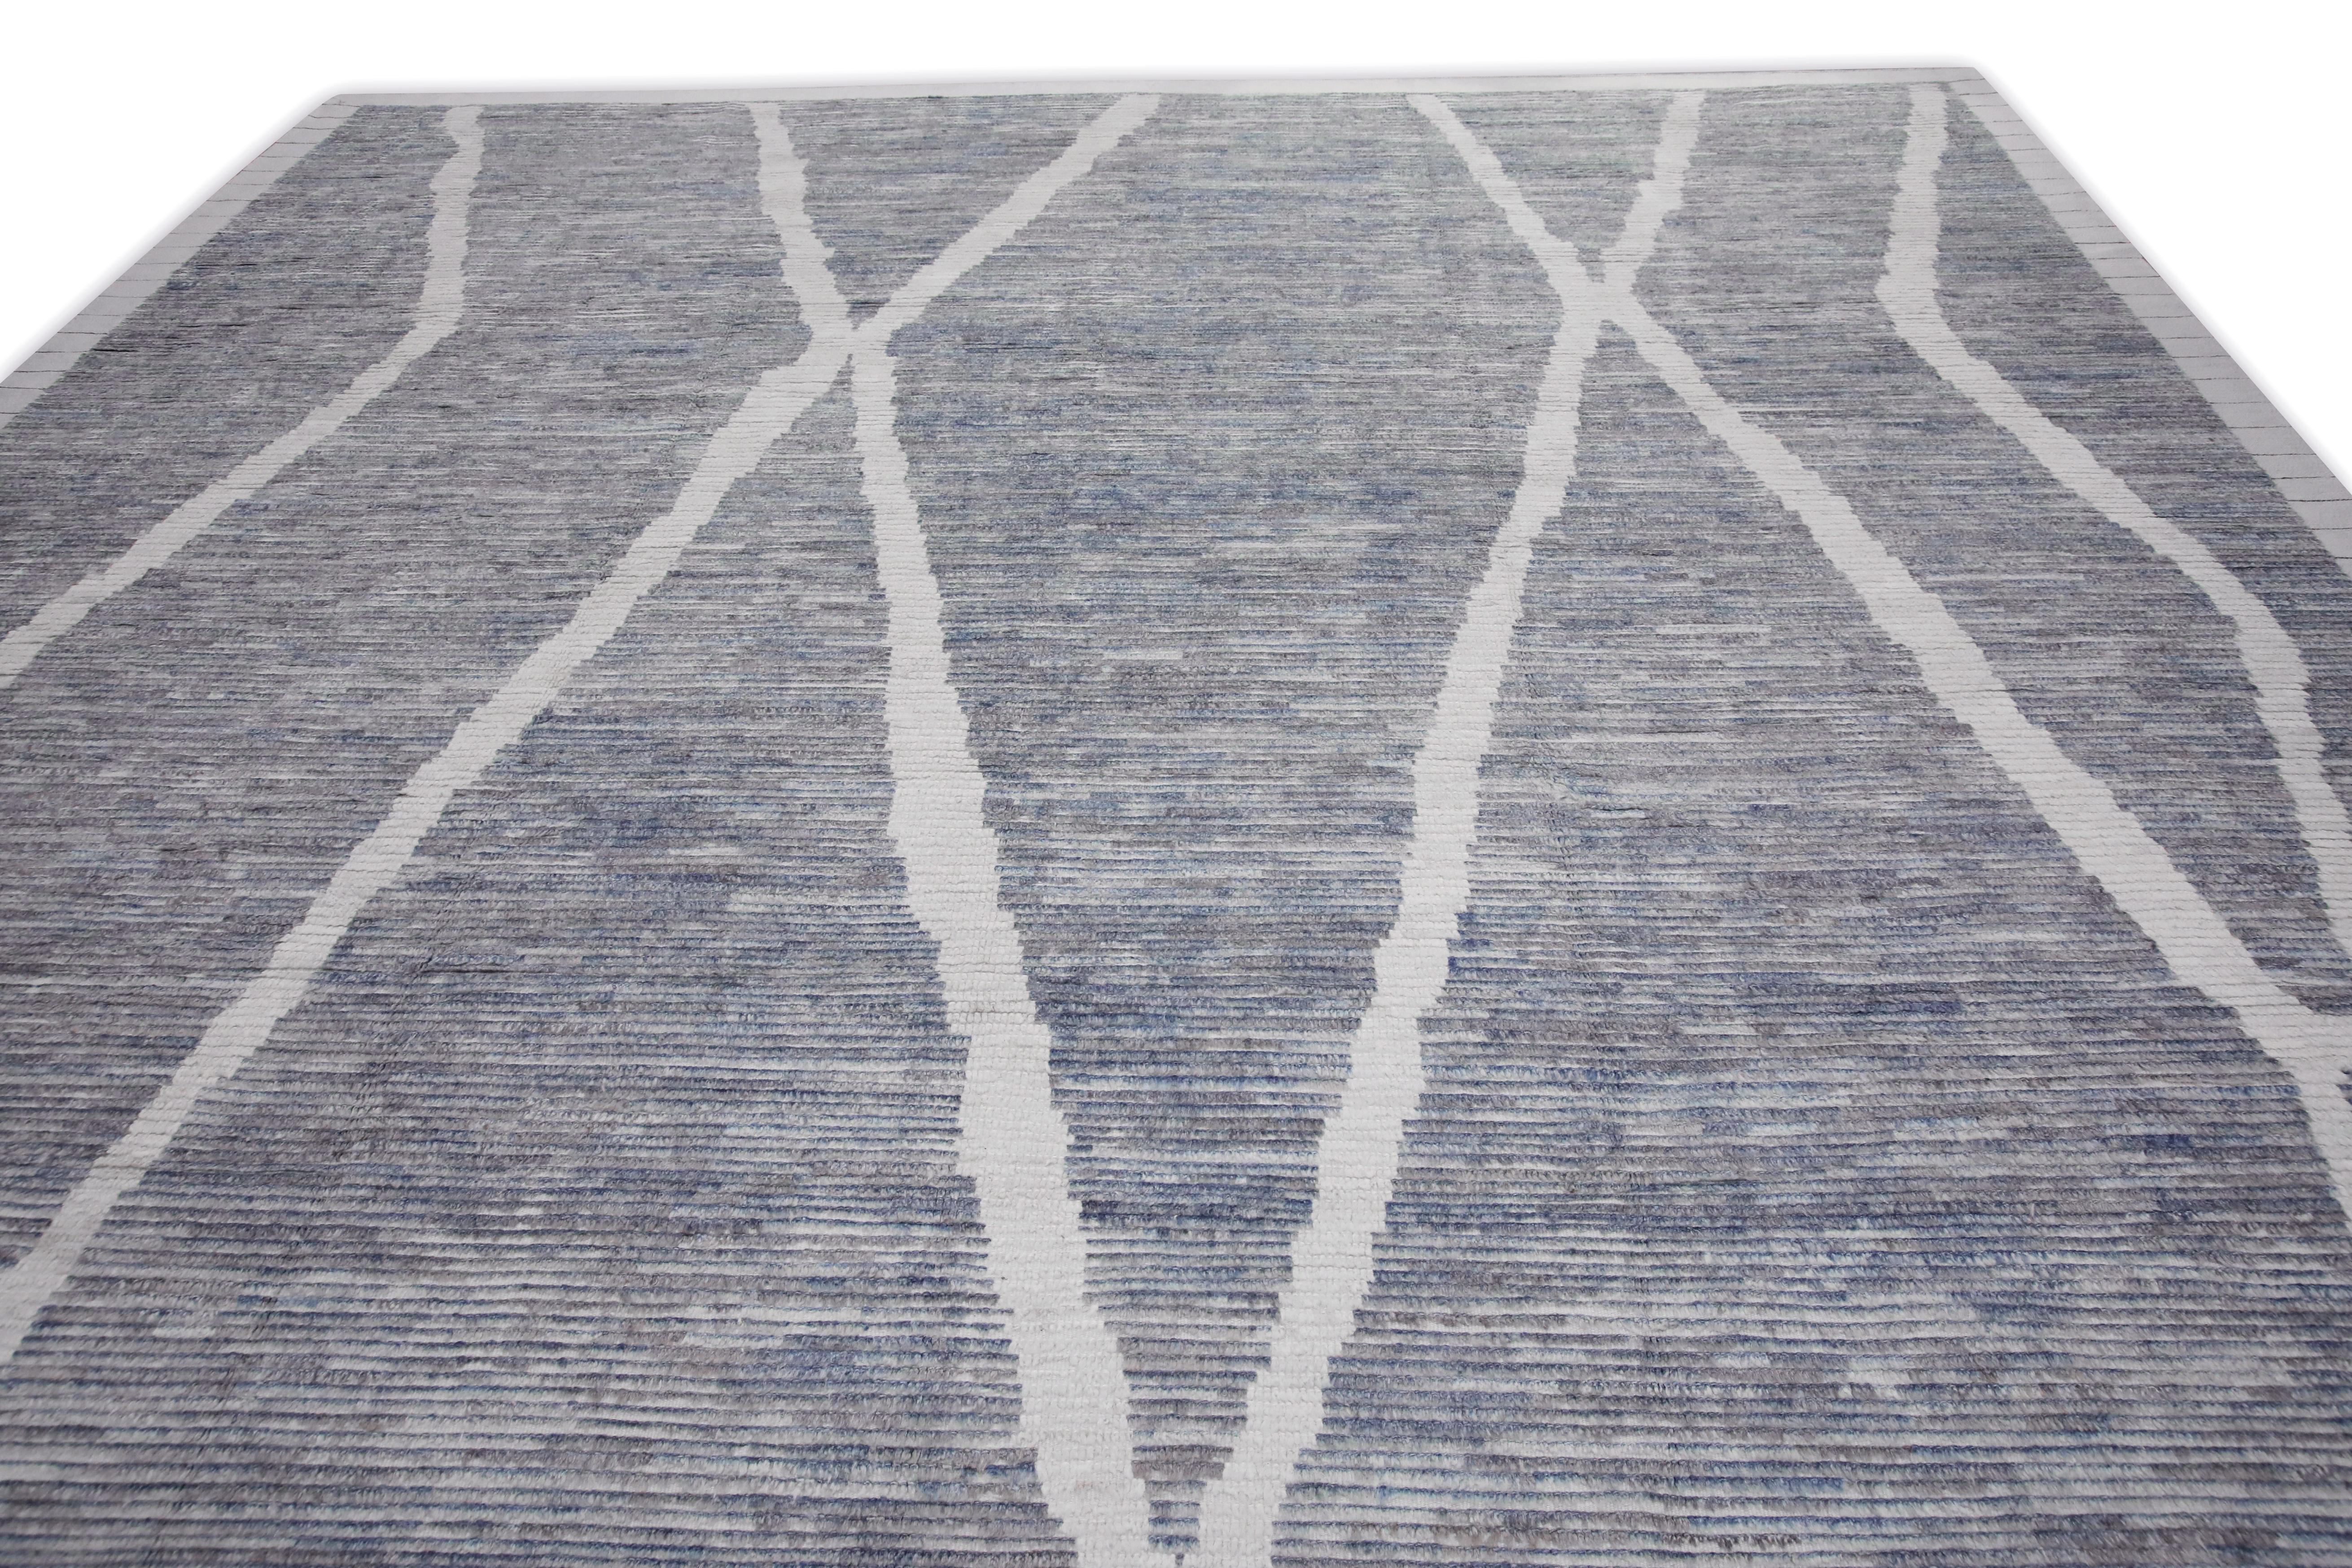 Vegetable Dyed Blue & Gray 21st Century Modern Moroccan Style Wool Rug 11'3